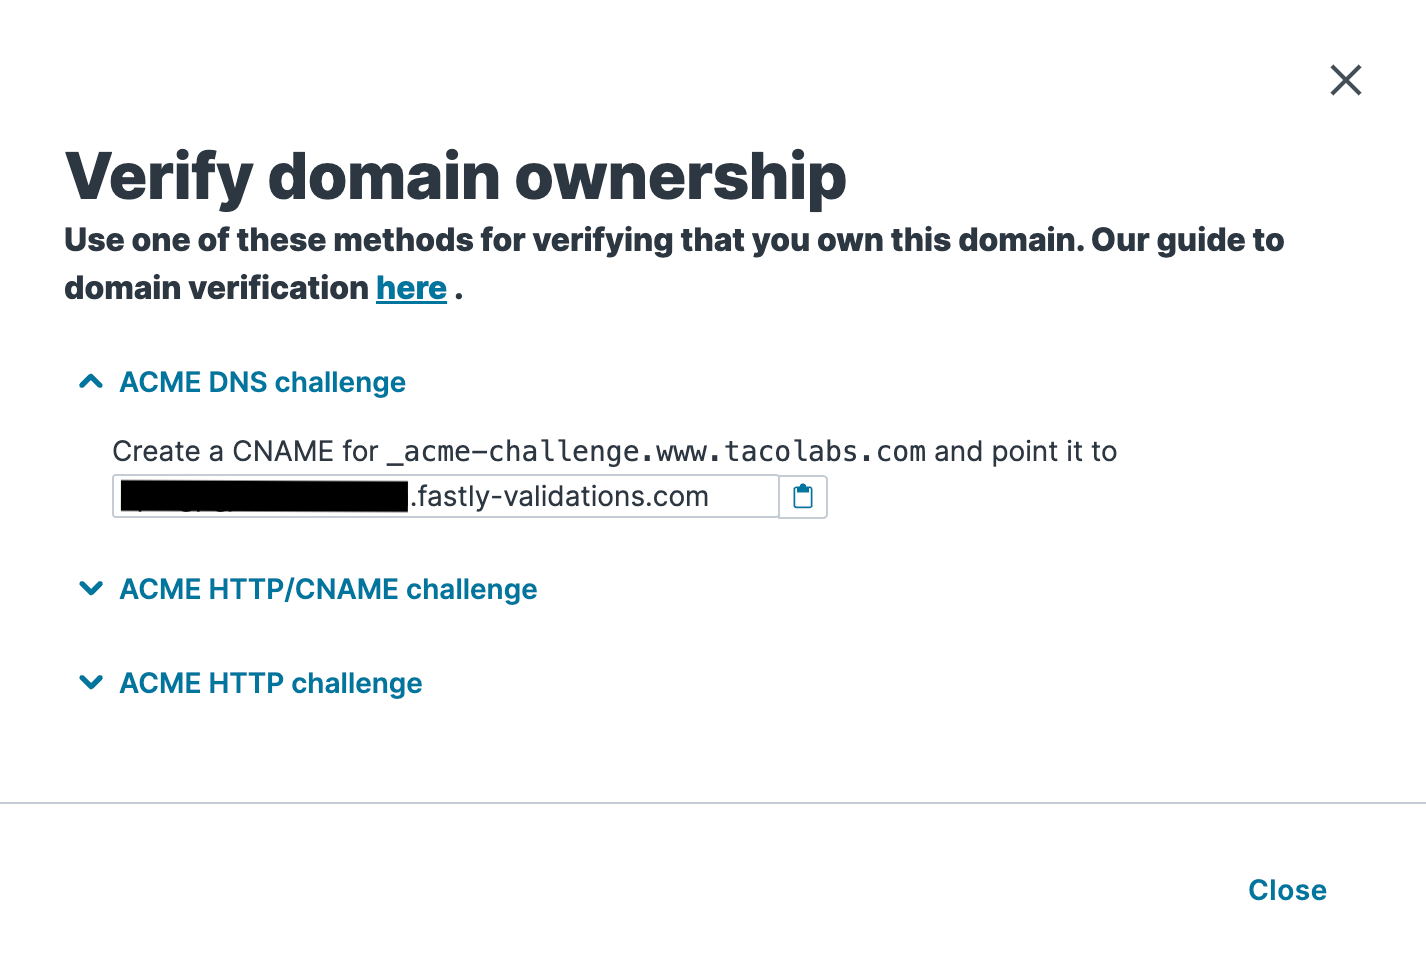 the cname to use for the acme dns challenge when verifying domain ownership